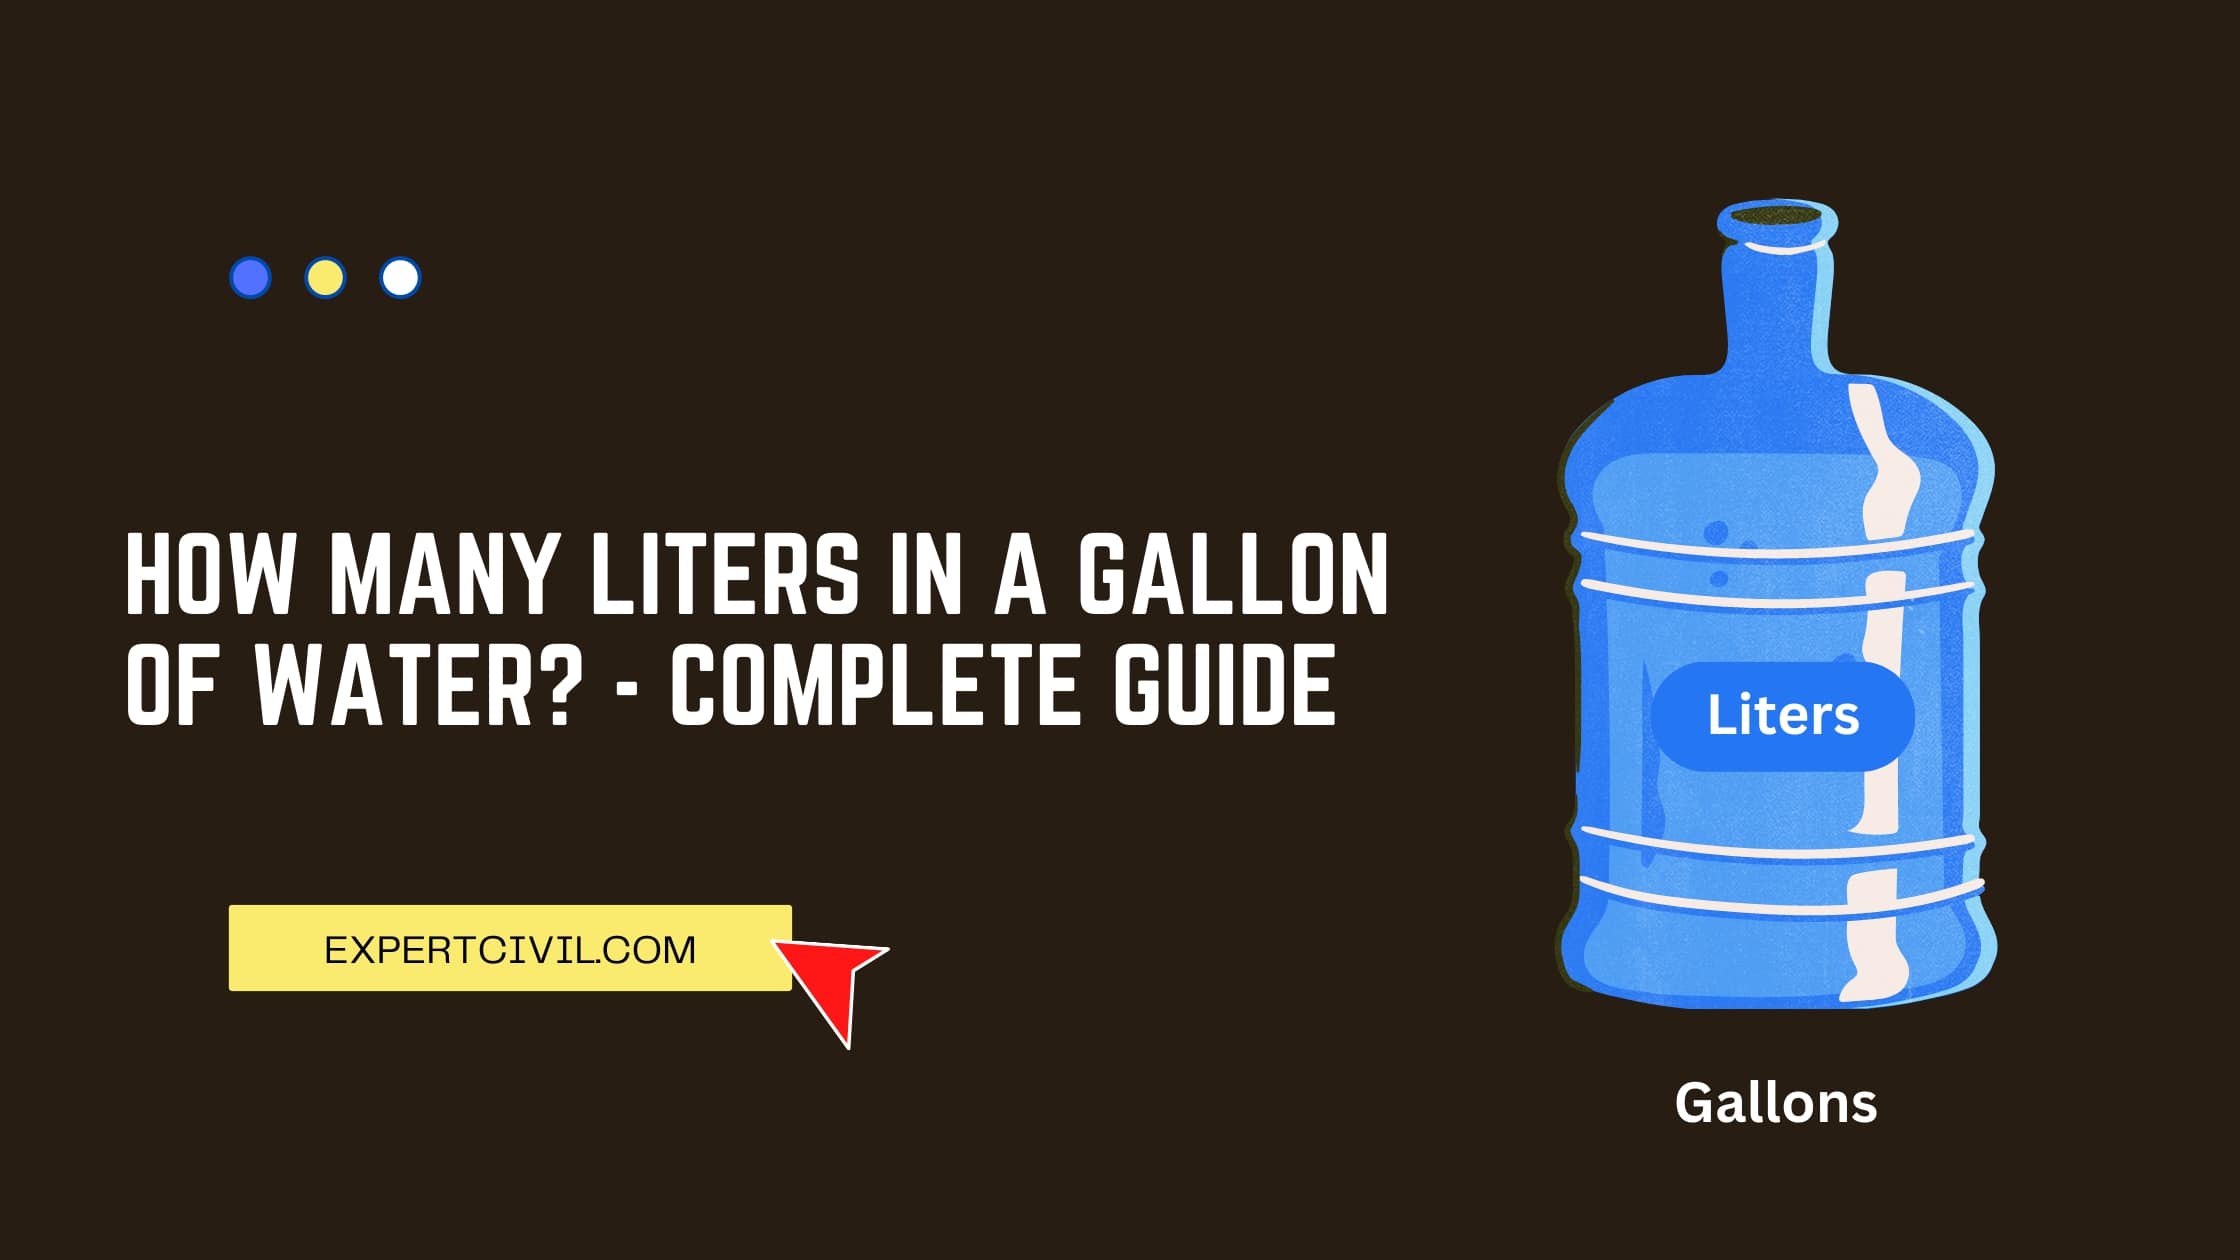 How Many Liters in a Gallon of Water?